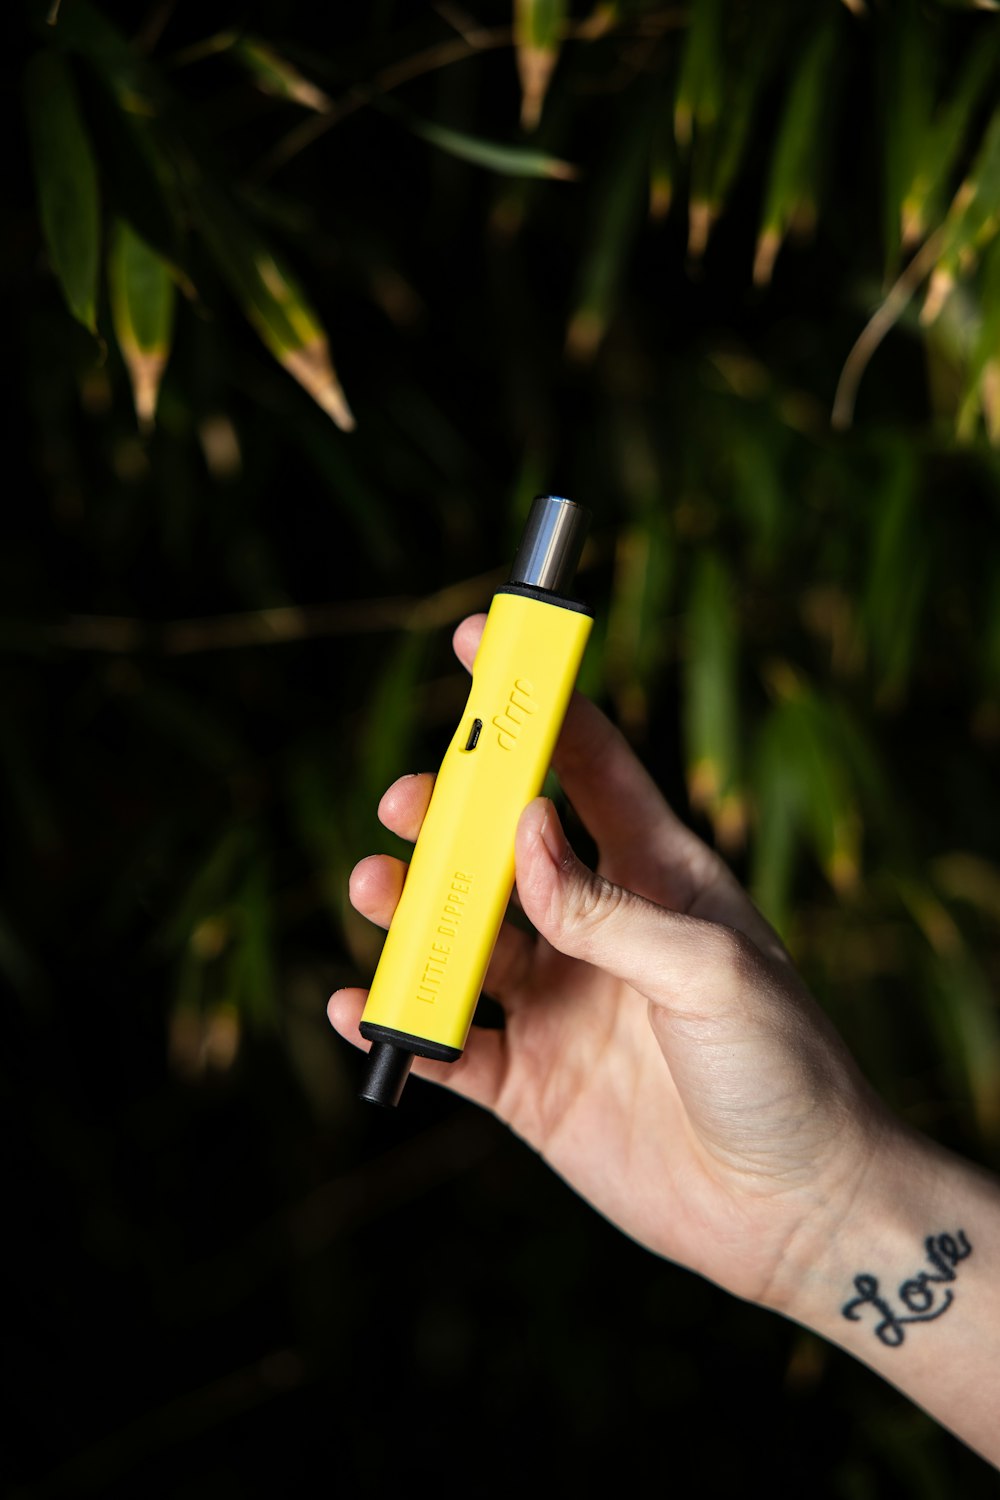 a person holding a yellow measuring device